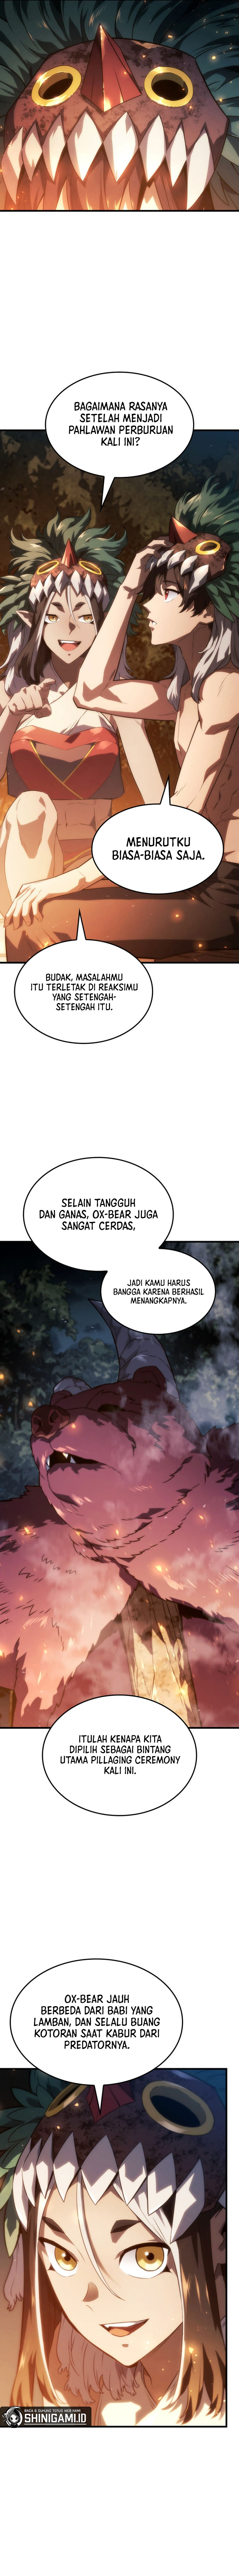 id-revenge-of-the-iron-blooded-sword-hound Chapter 37